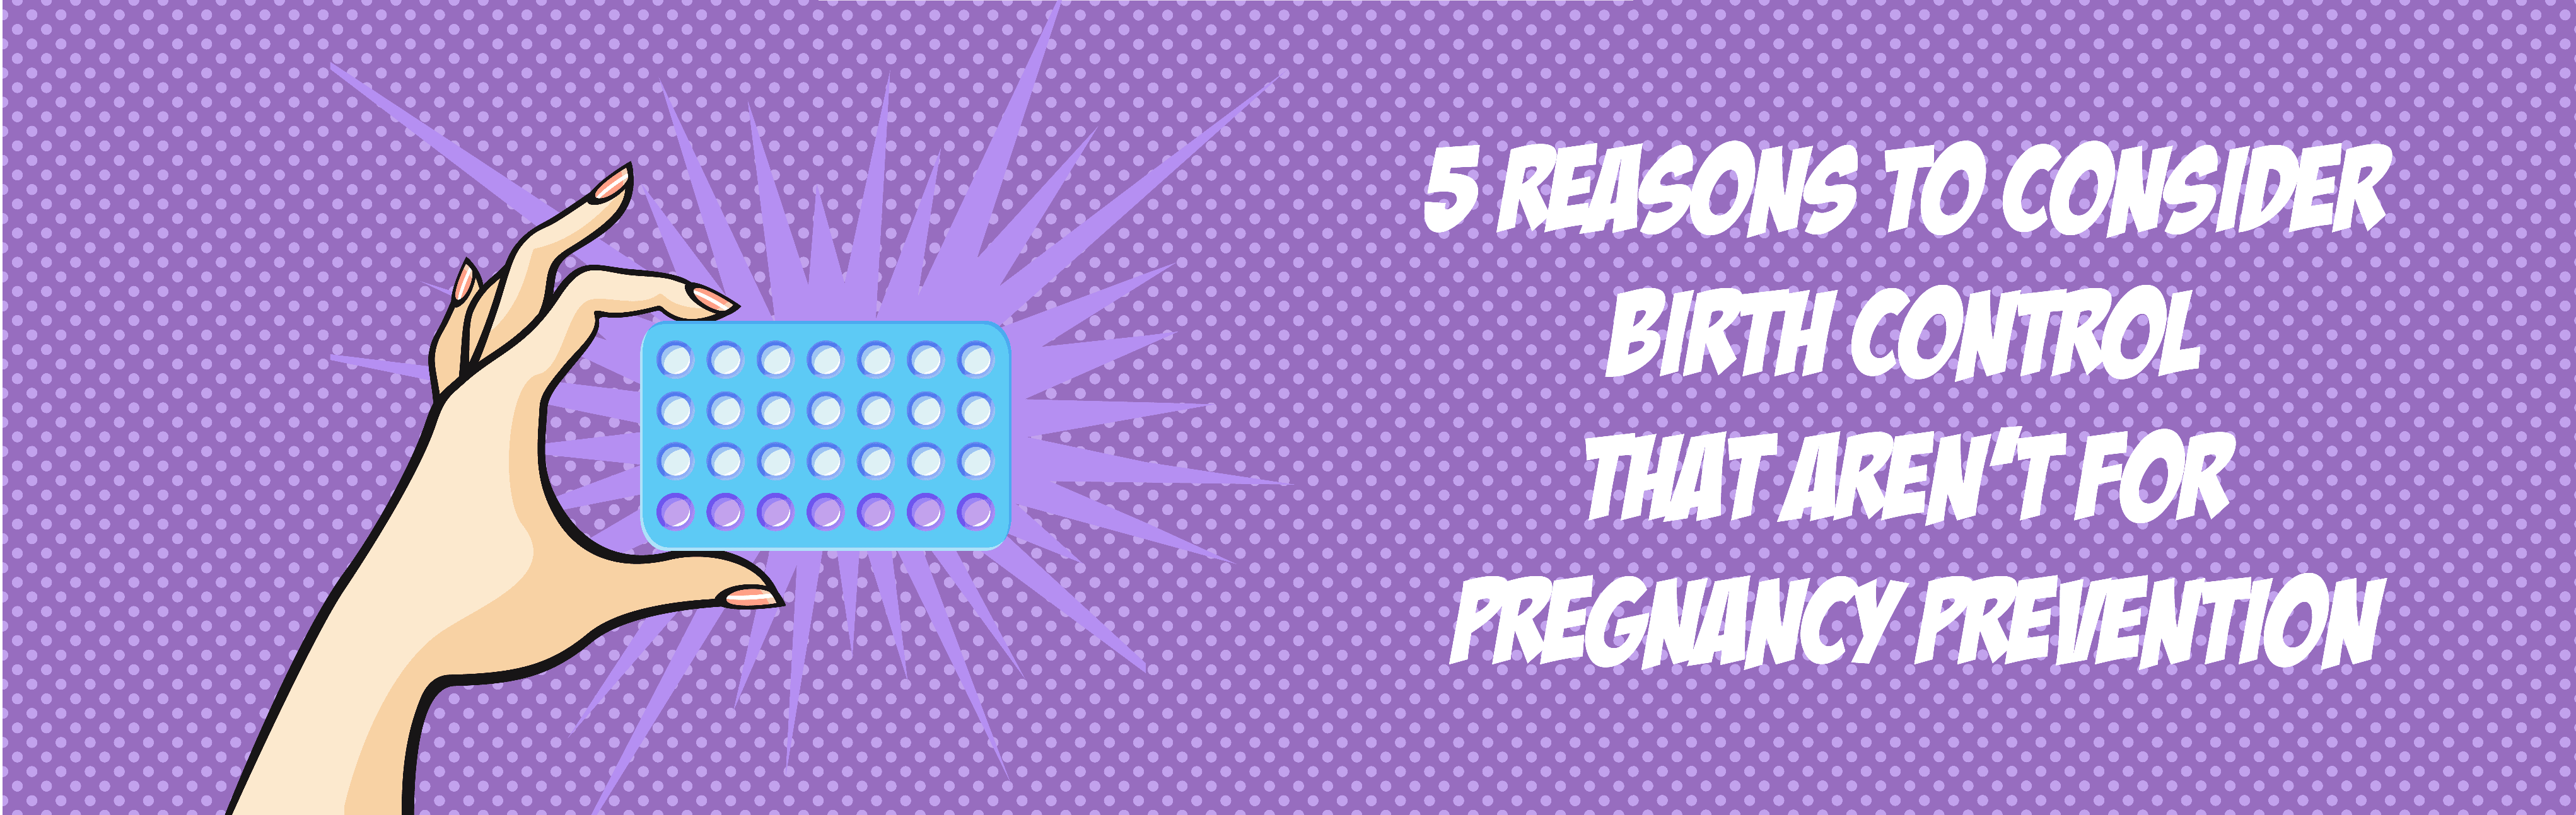 5 Reasons to Consider Birth Control That Aren't for Pregnancy Prevention